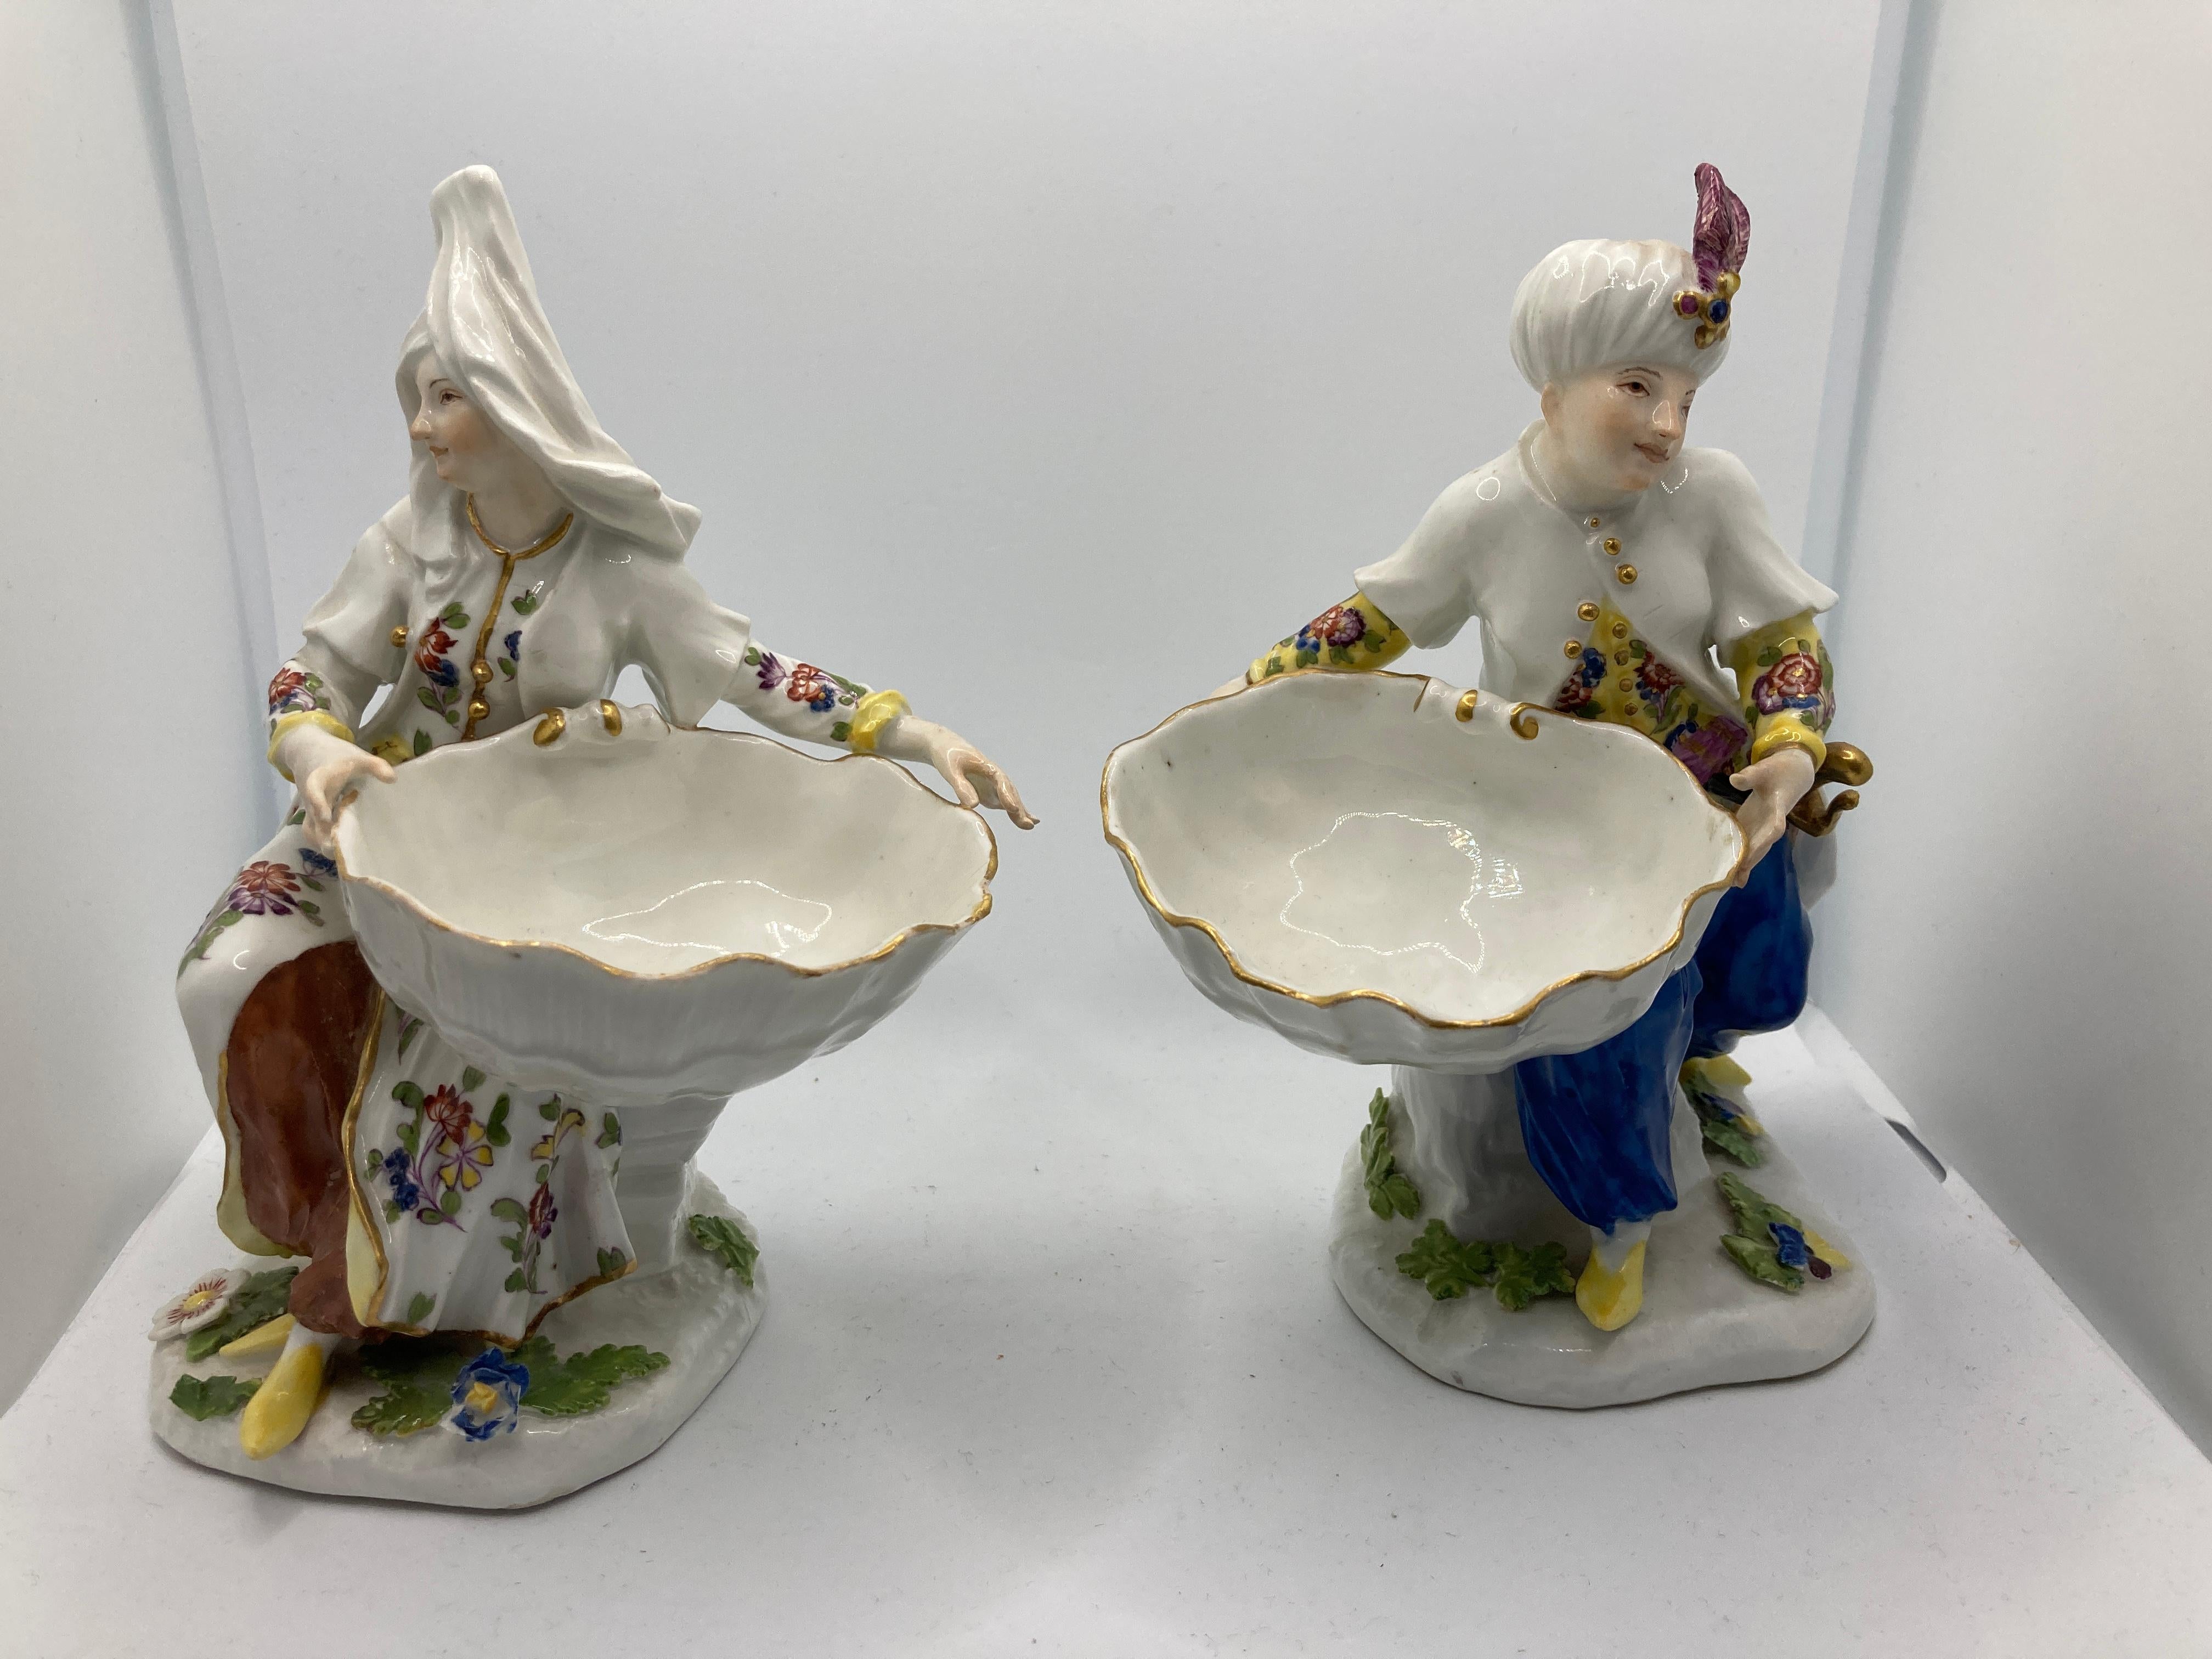 18th Century Meissen Porcelain, Pair of Turkish figures holding sweetmeat / table salt bowl. These sweetmeat figures were made around 1745, the original models being done by J F Eberlain and show the fashion for Orientalism popular at the time.